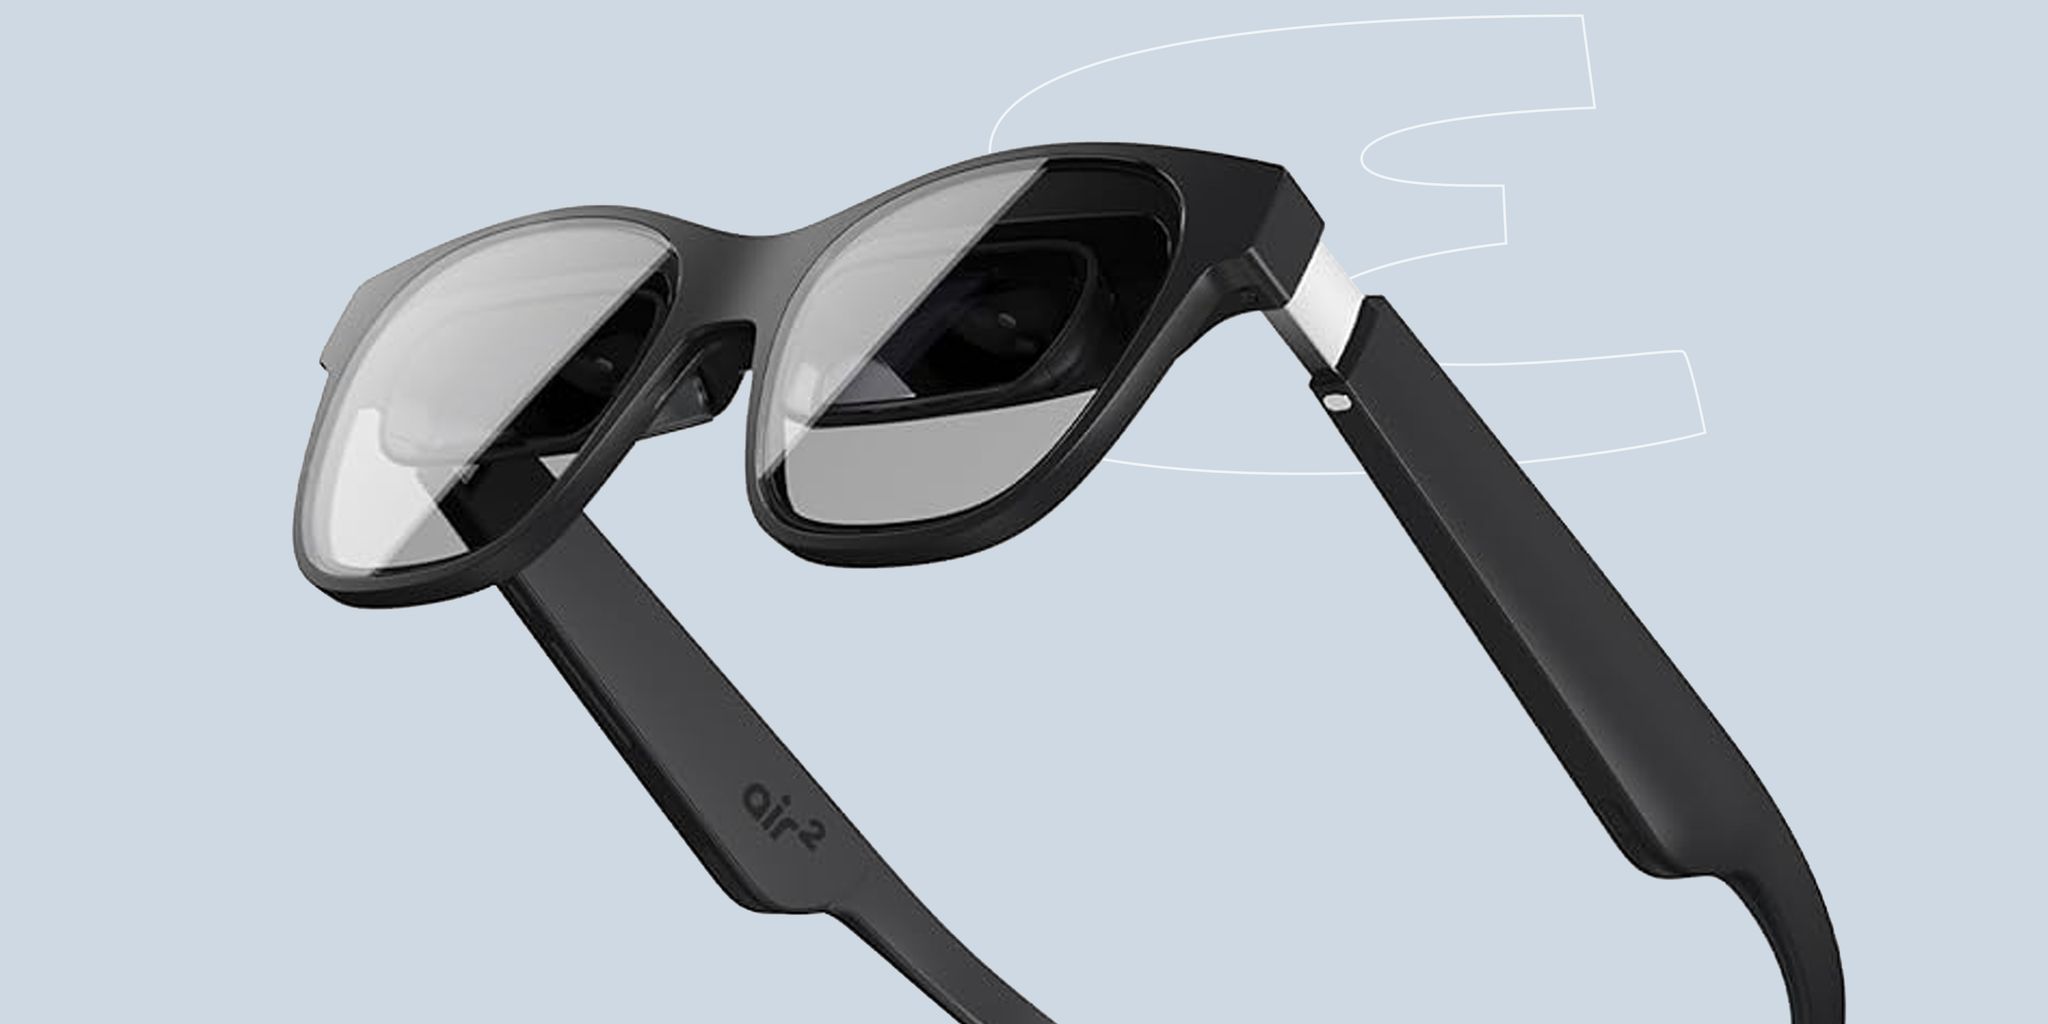 5 Best Smart Glasses 2022 - Frames with Speakers, Cameras, and AR